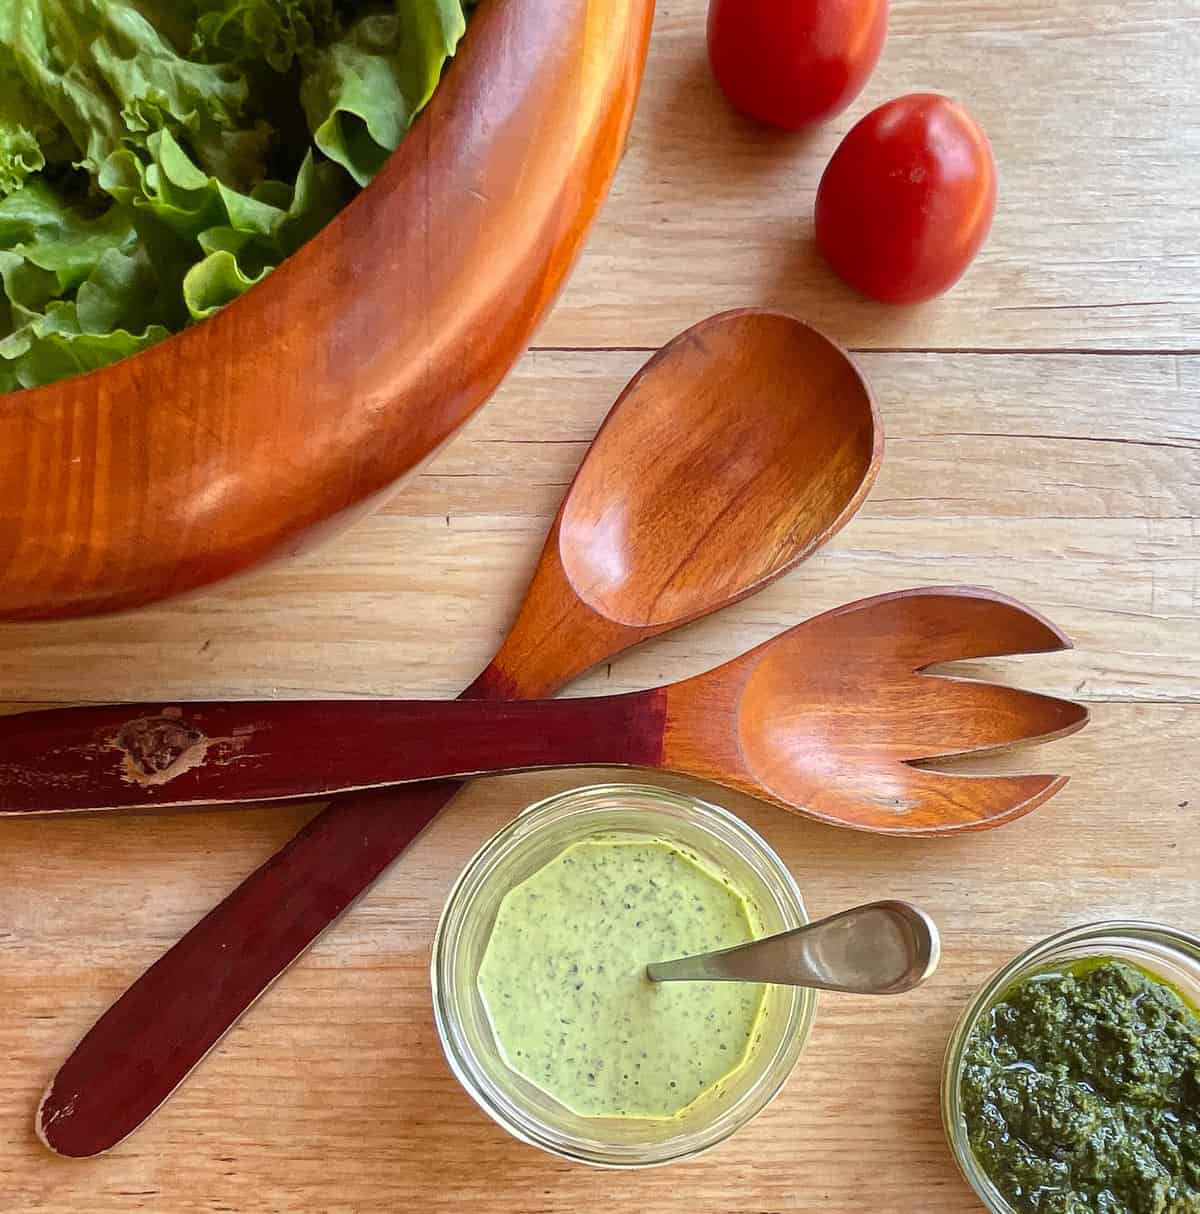 salad bowl, salad tongs, two roma tomatoes, bowl of creamy pesto with spoon, and basil leaves.